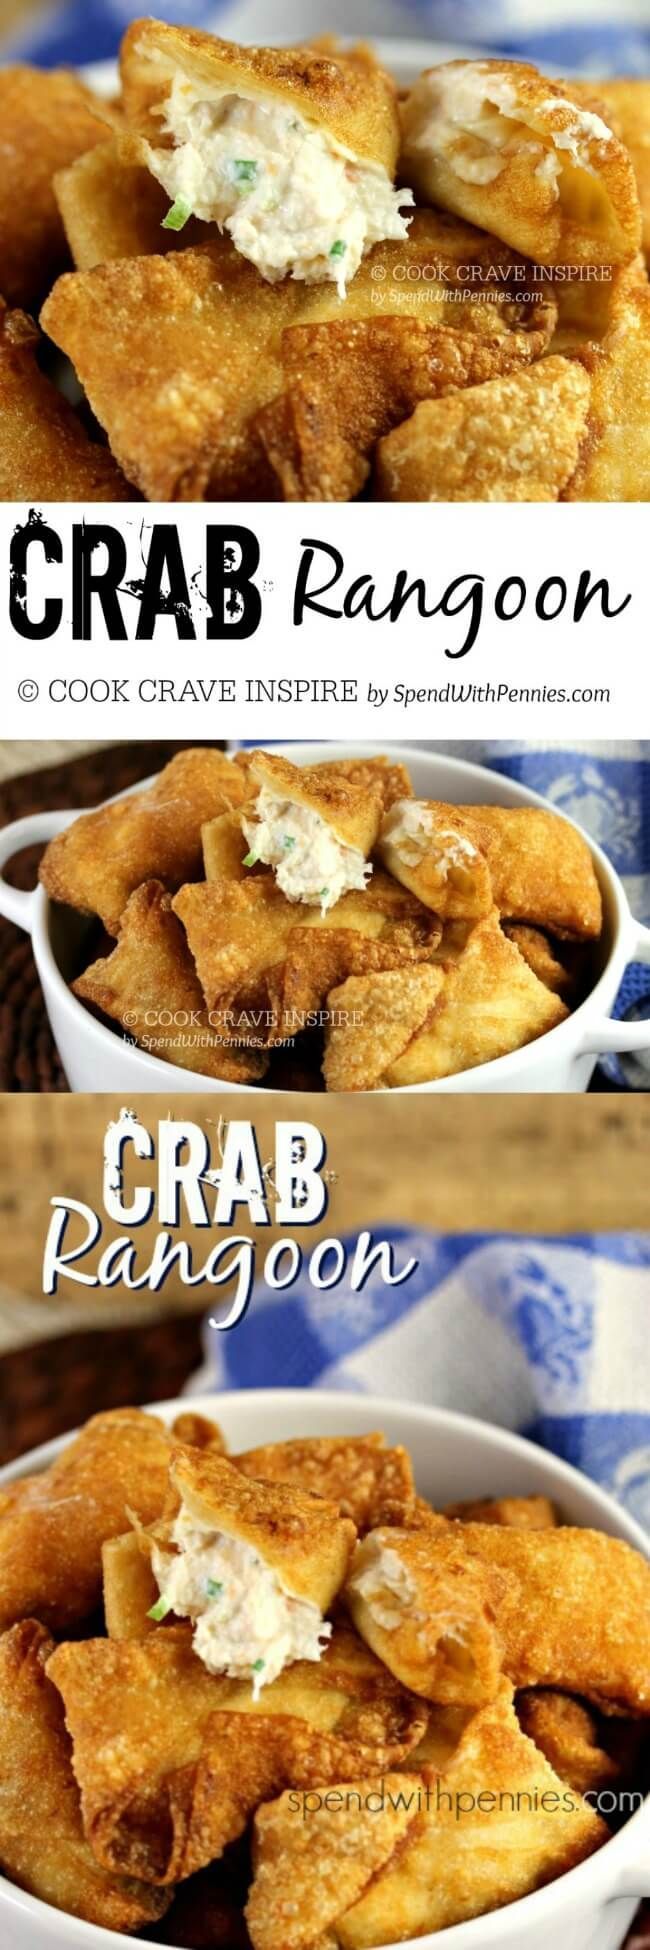 This Crispy Crab Rangoon recipe is easy to make and tastes better than your favorite restaurant! These crispy crab filled wontons